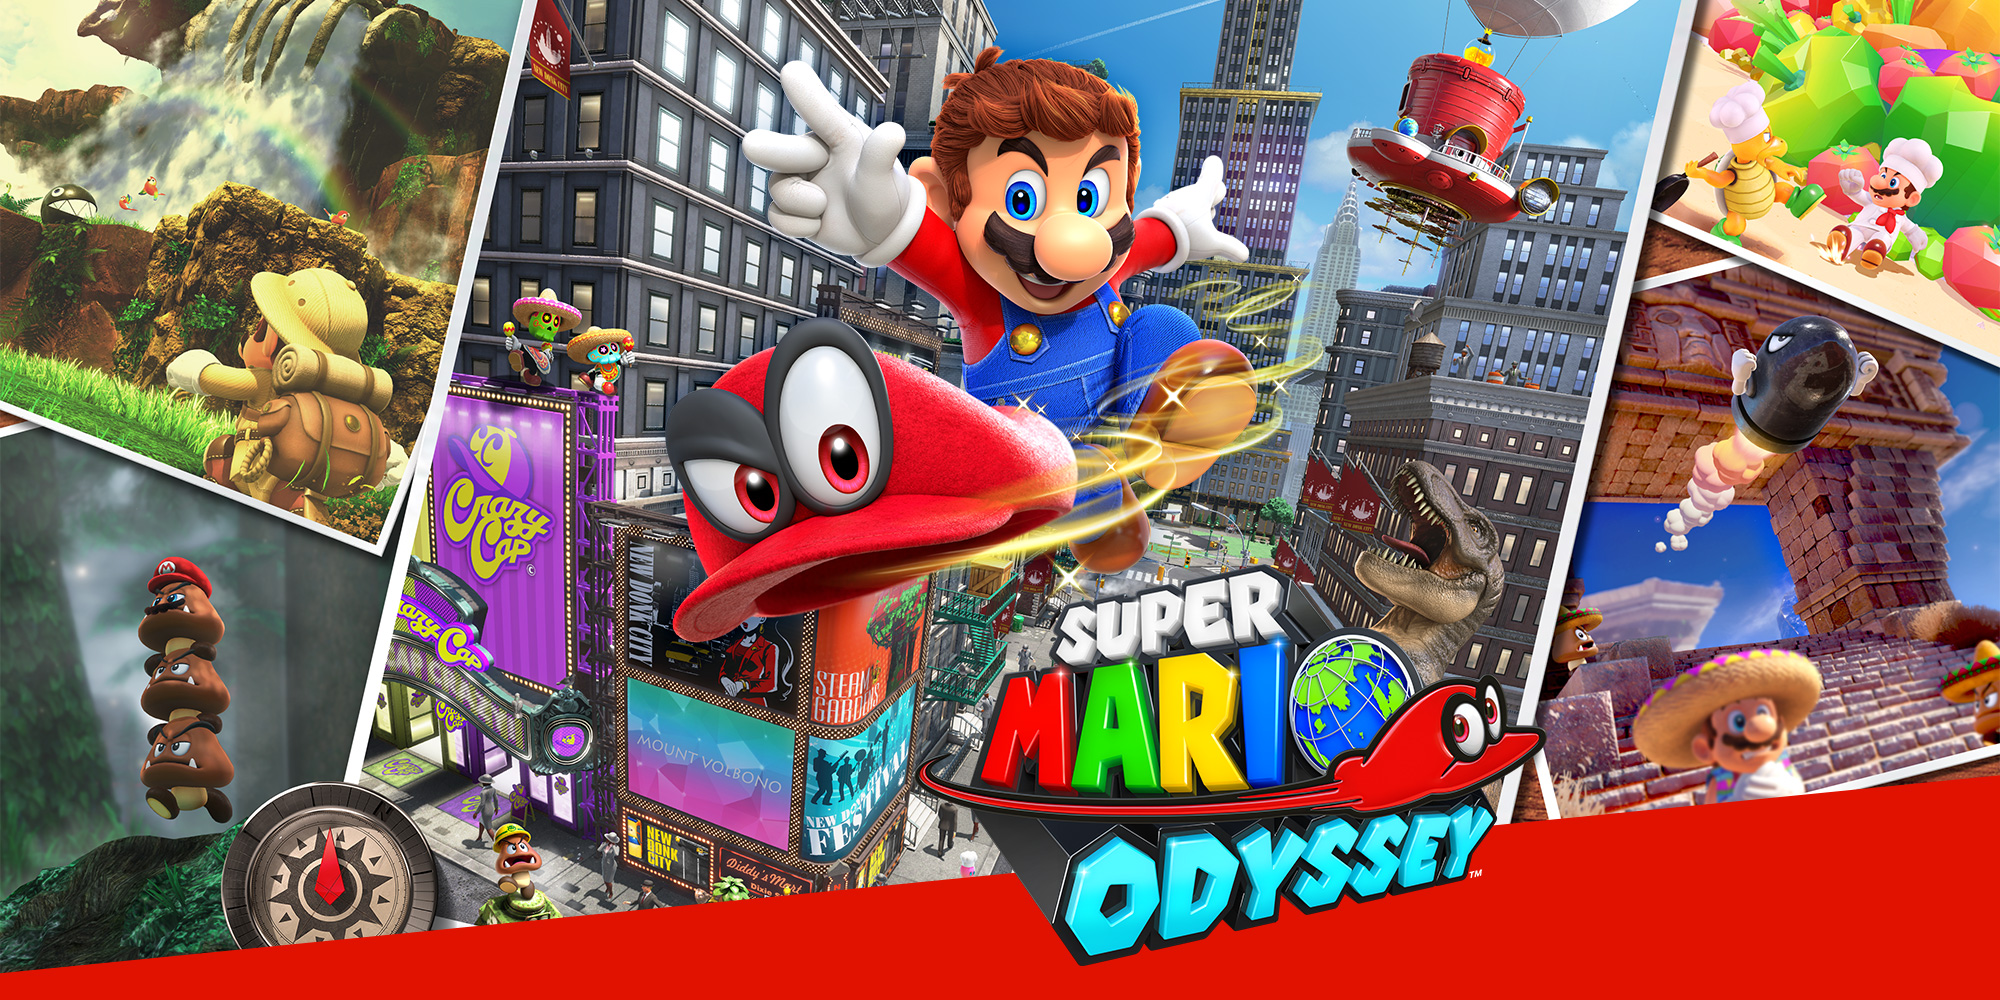 Not sure if you want to buy Super Mario Odyssey?